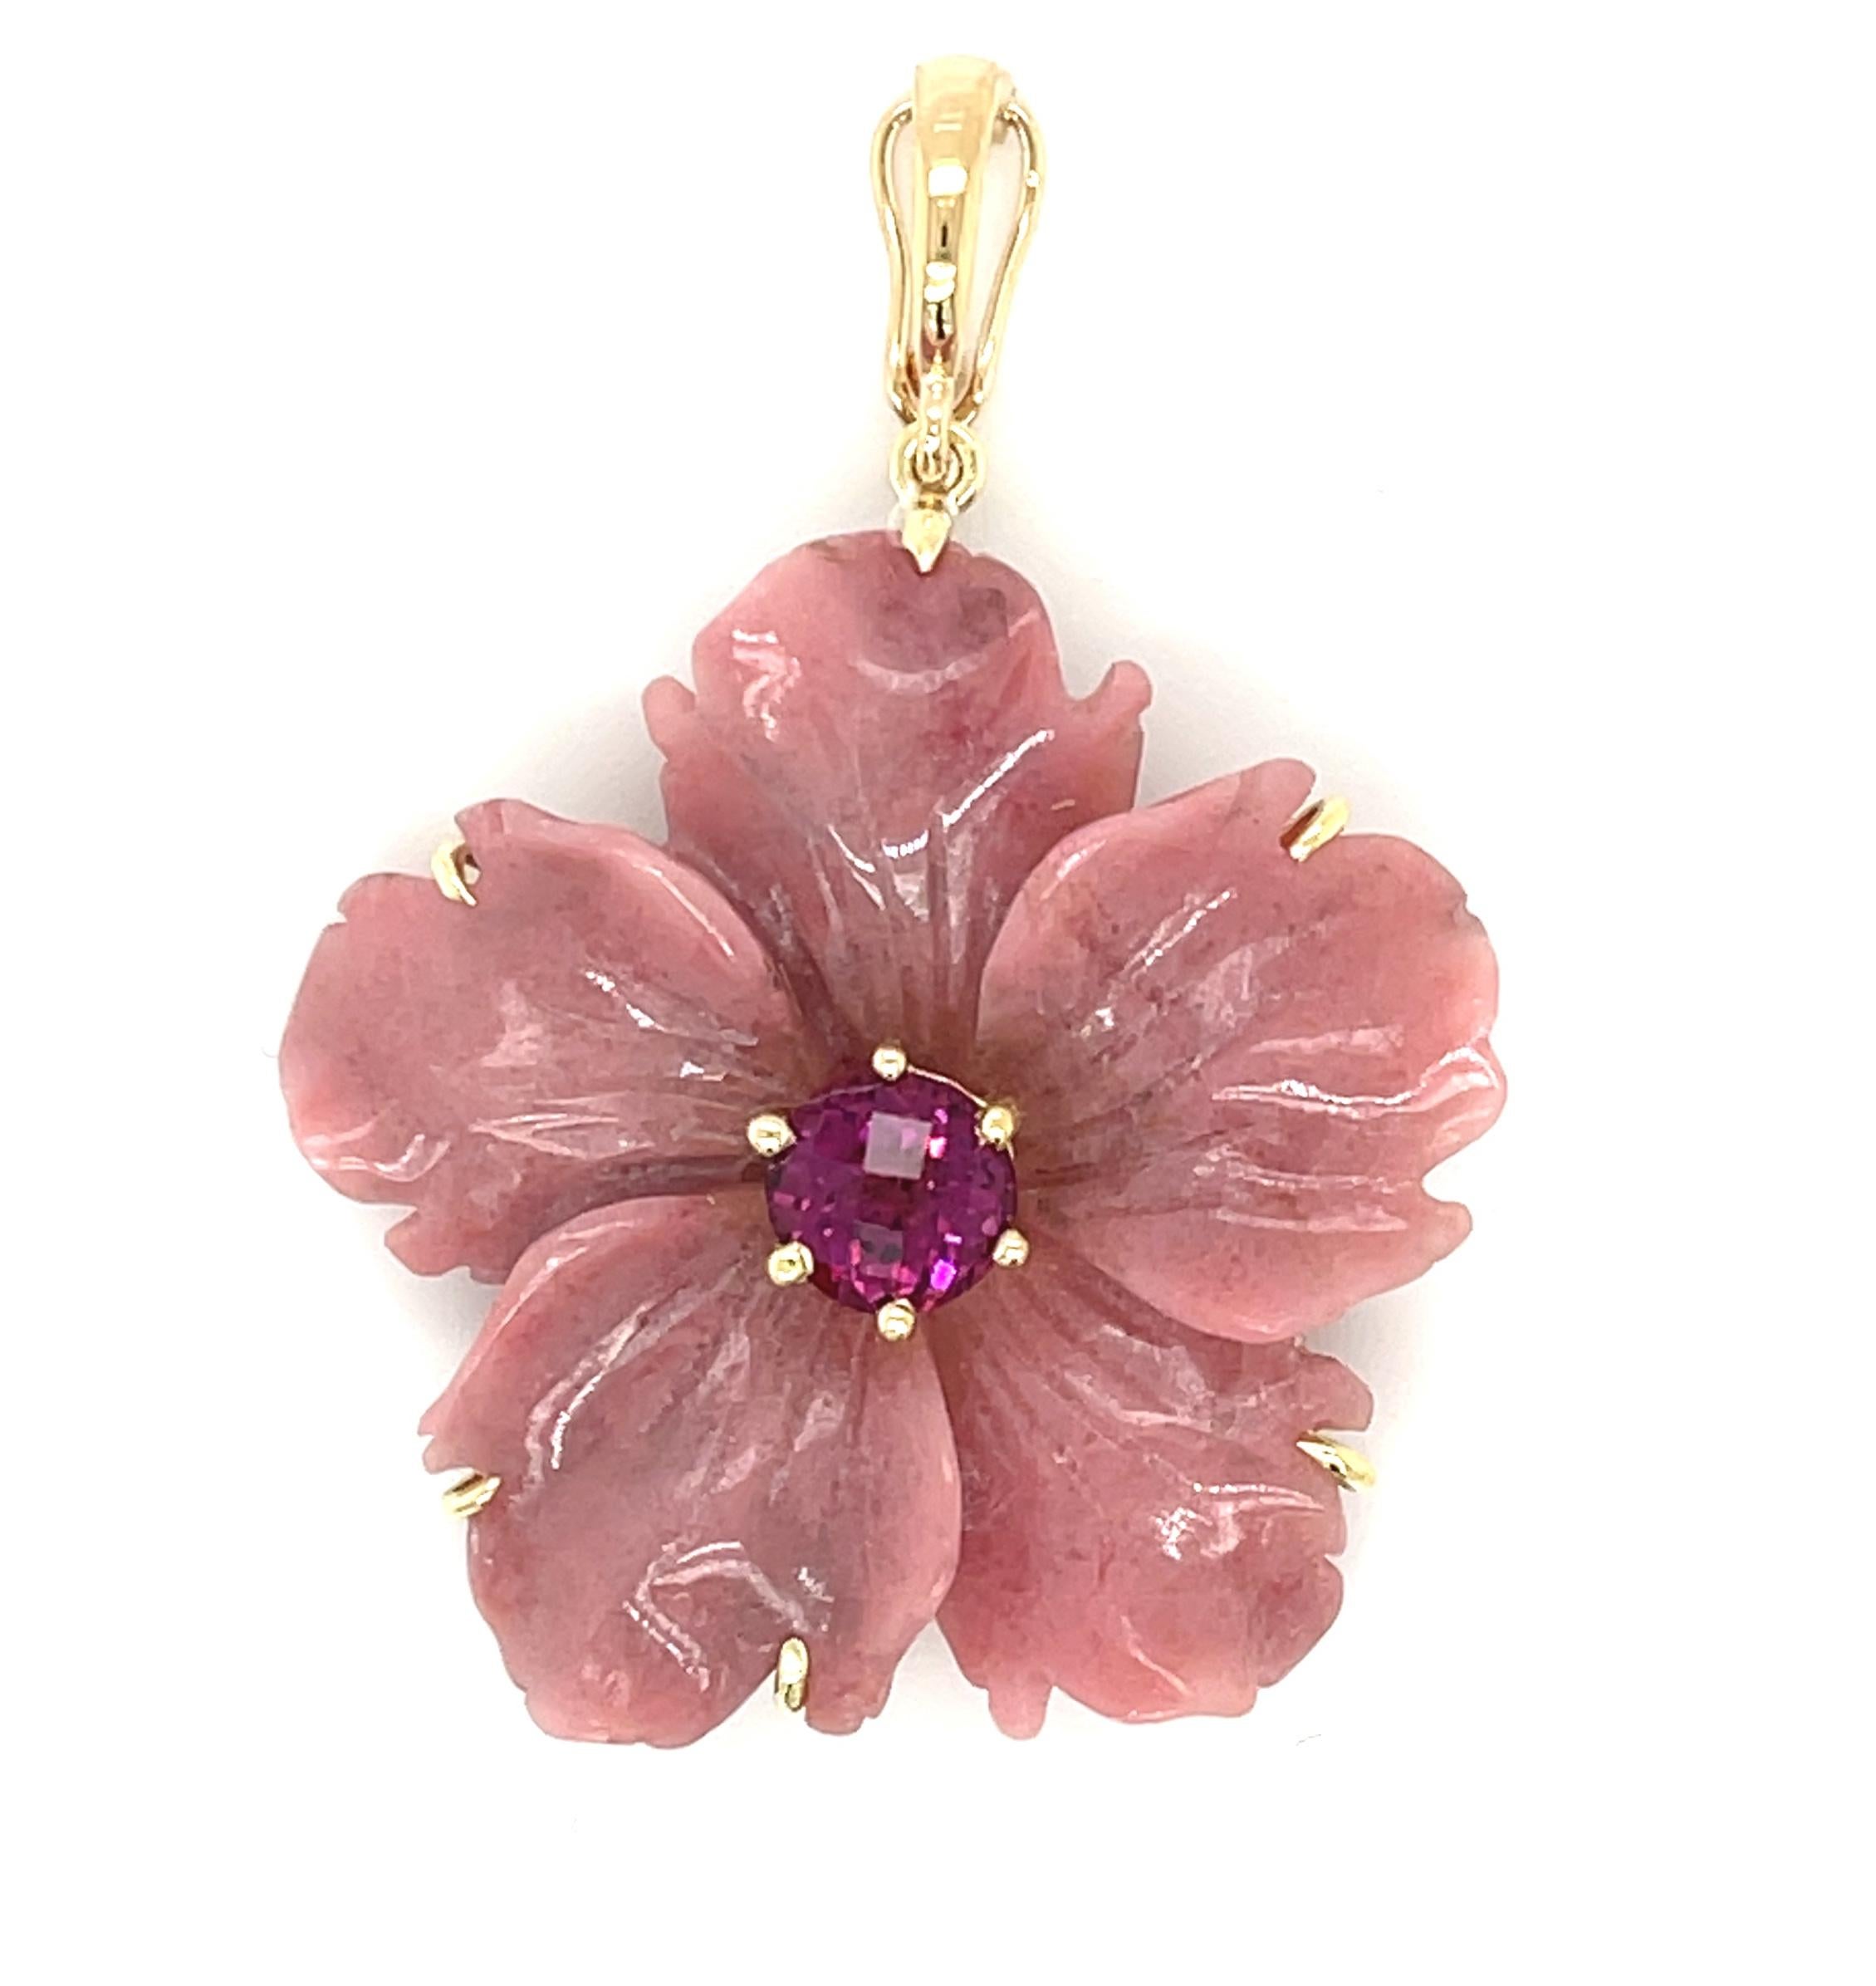 This eye-catching necklace features a beautifully hand-carved rhodonite floral pendant on a lovely strand of rose-colored rhodochrosite beads. The 6mm beads were hand strung on silk thread and accented with richly colored, round garnet beads that